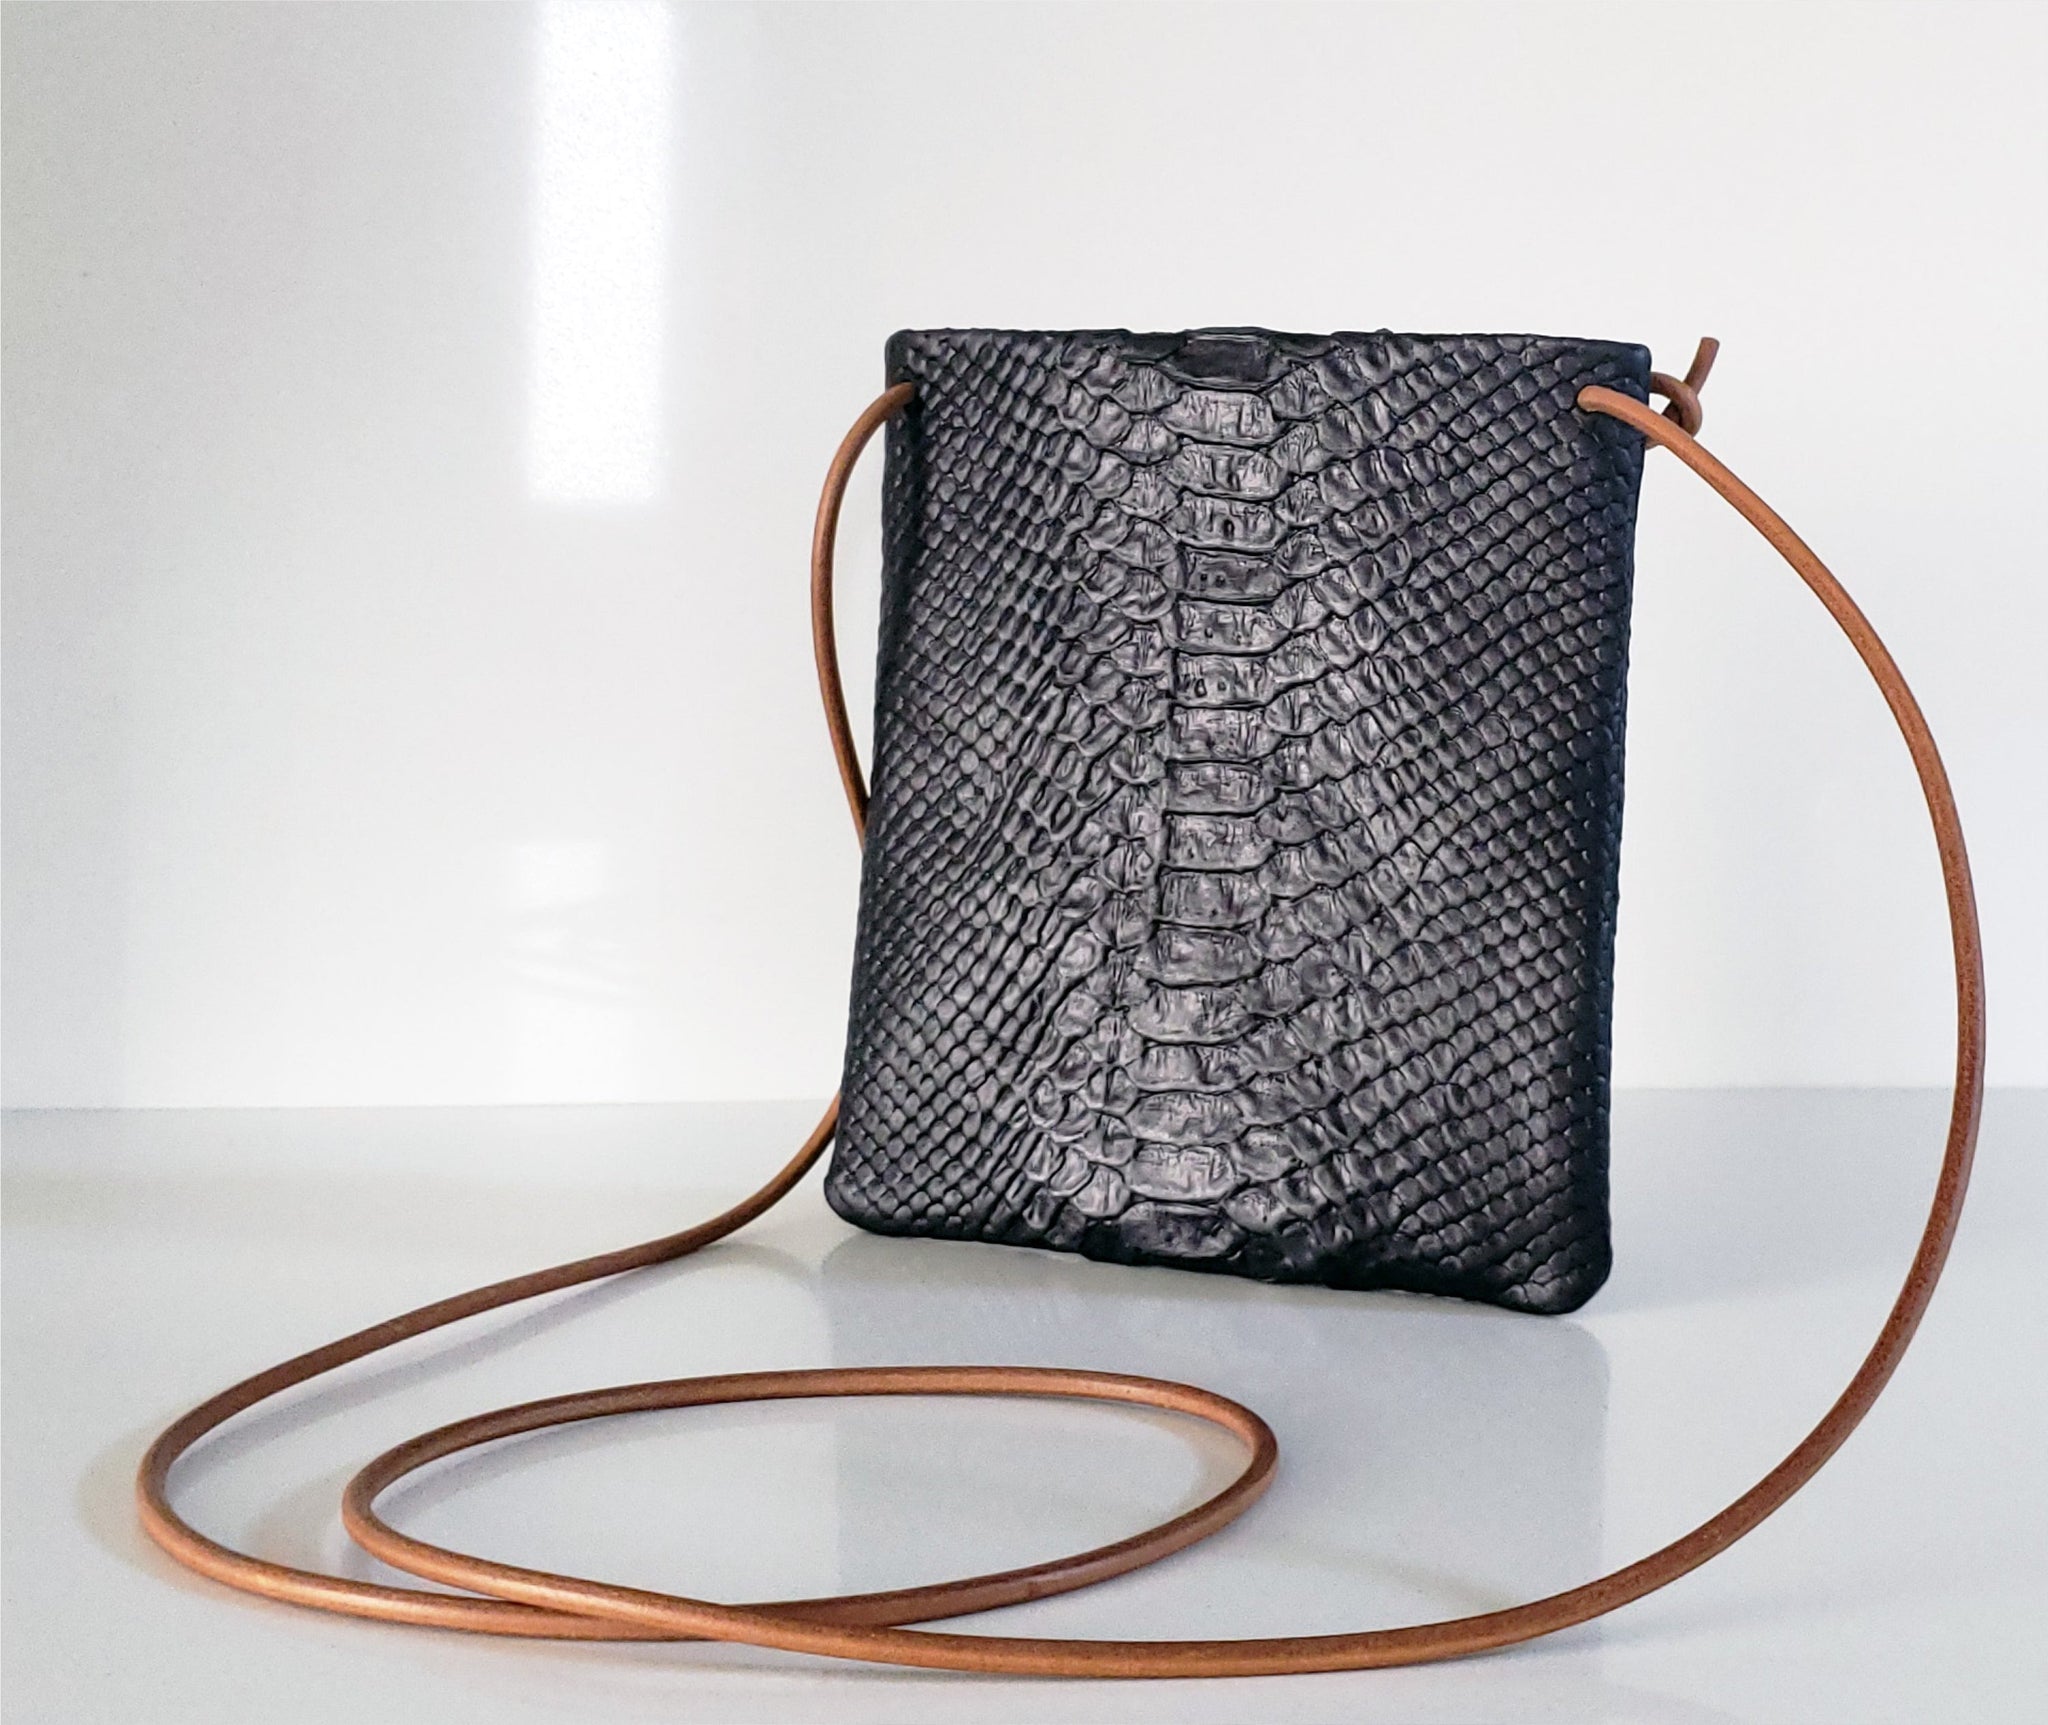 The black python purse is crafted in rich Italian leather with an adjustable & detachable shoulder strap to carry it crossbody or as an evening clutch. 